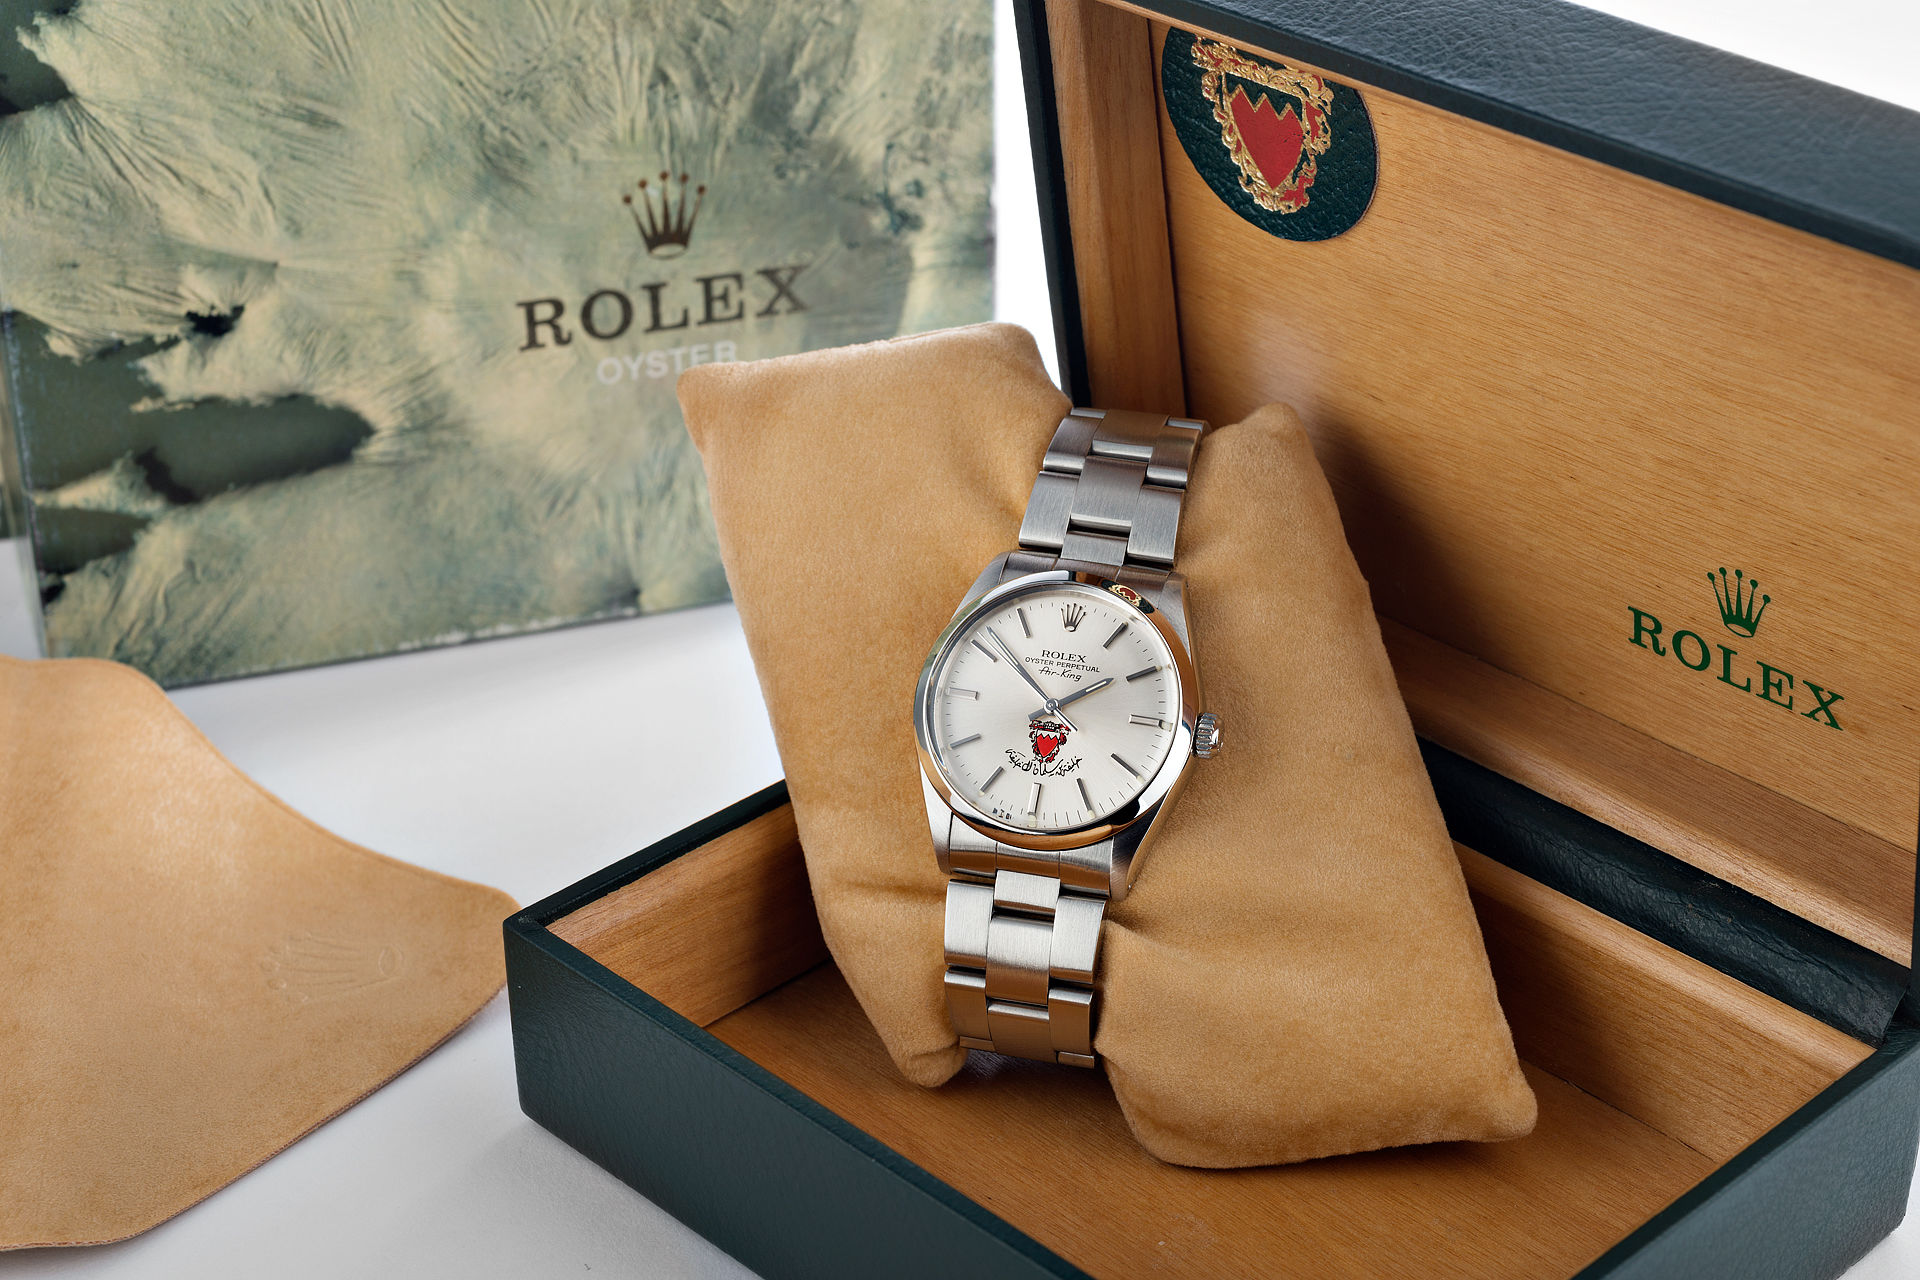 ref 5500 | Vintage - Crested Box | Rolex Air-King